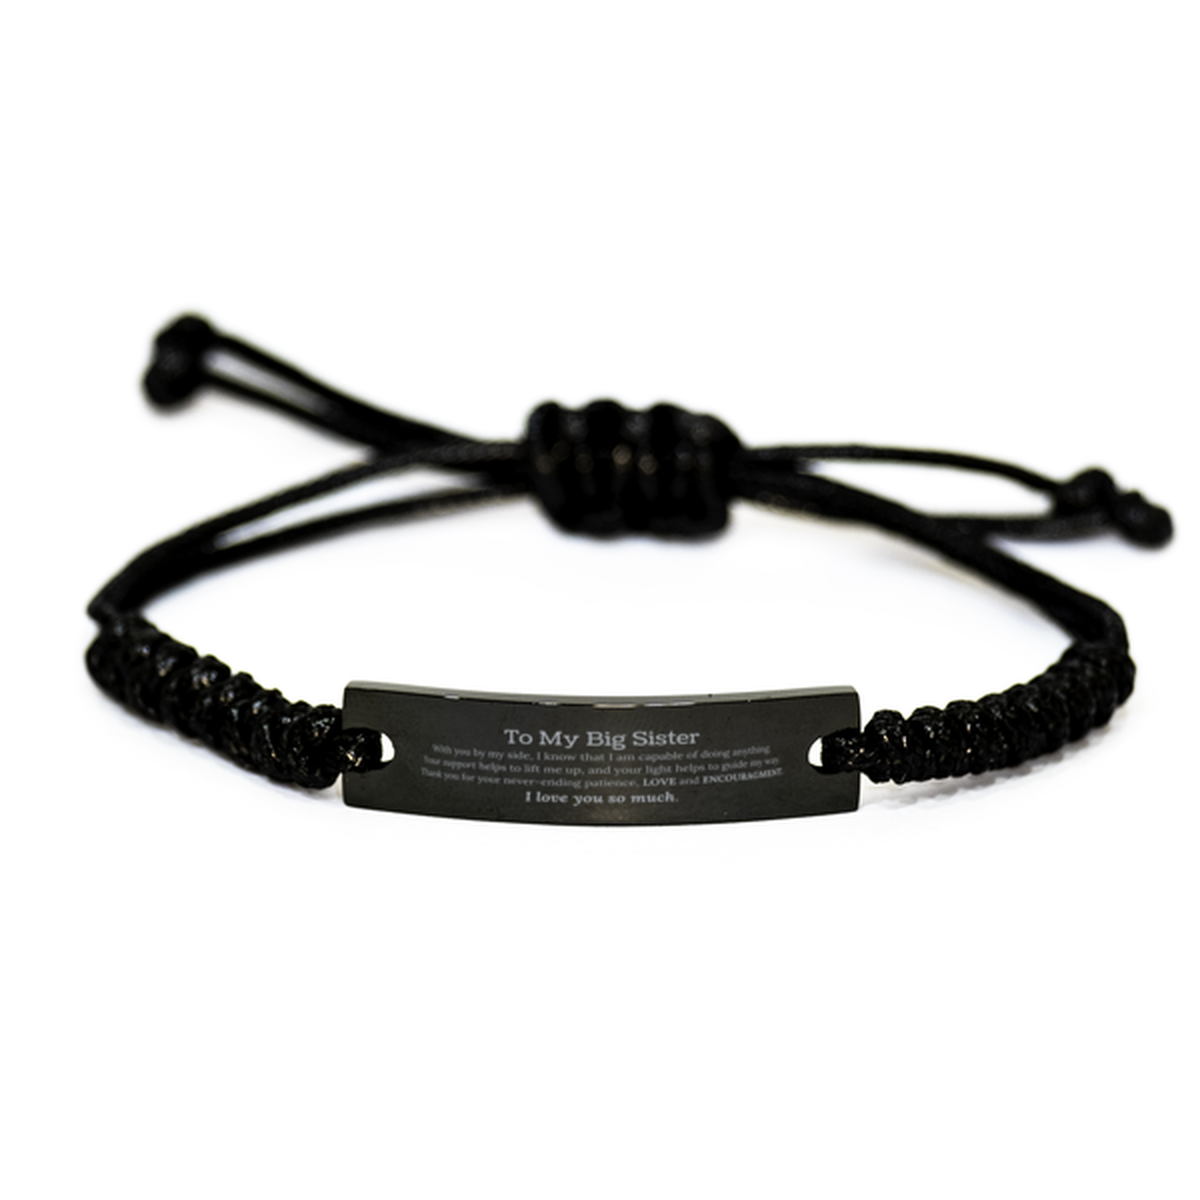 Appreciation Big Sister Black Rope Bracelet Gifts, To My Big Sister Birthday Christmas Wedding Keepsake Gifts for Big Sister With you by my side, I know that I am capable of doing anything. I love you so much